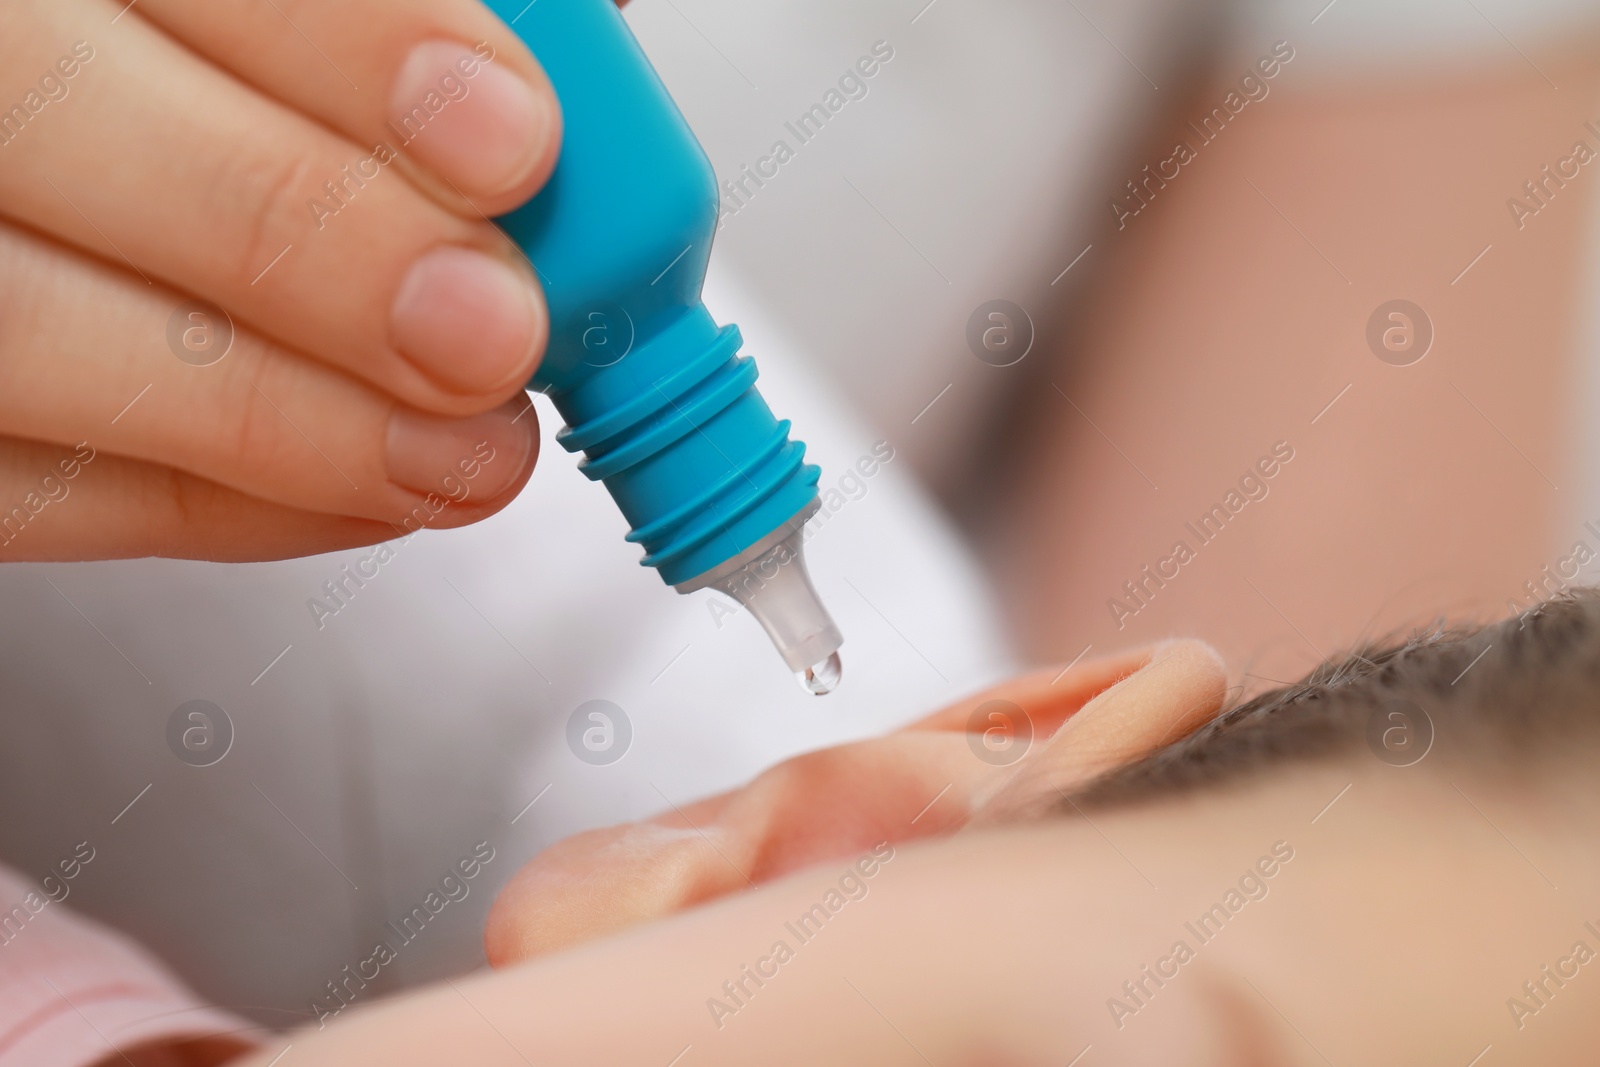 Photo of Mother dripping medication into daughter's ear on blurred background, closeup